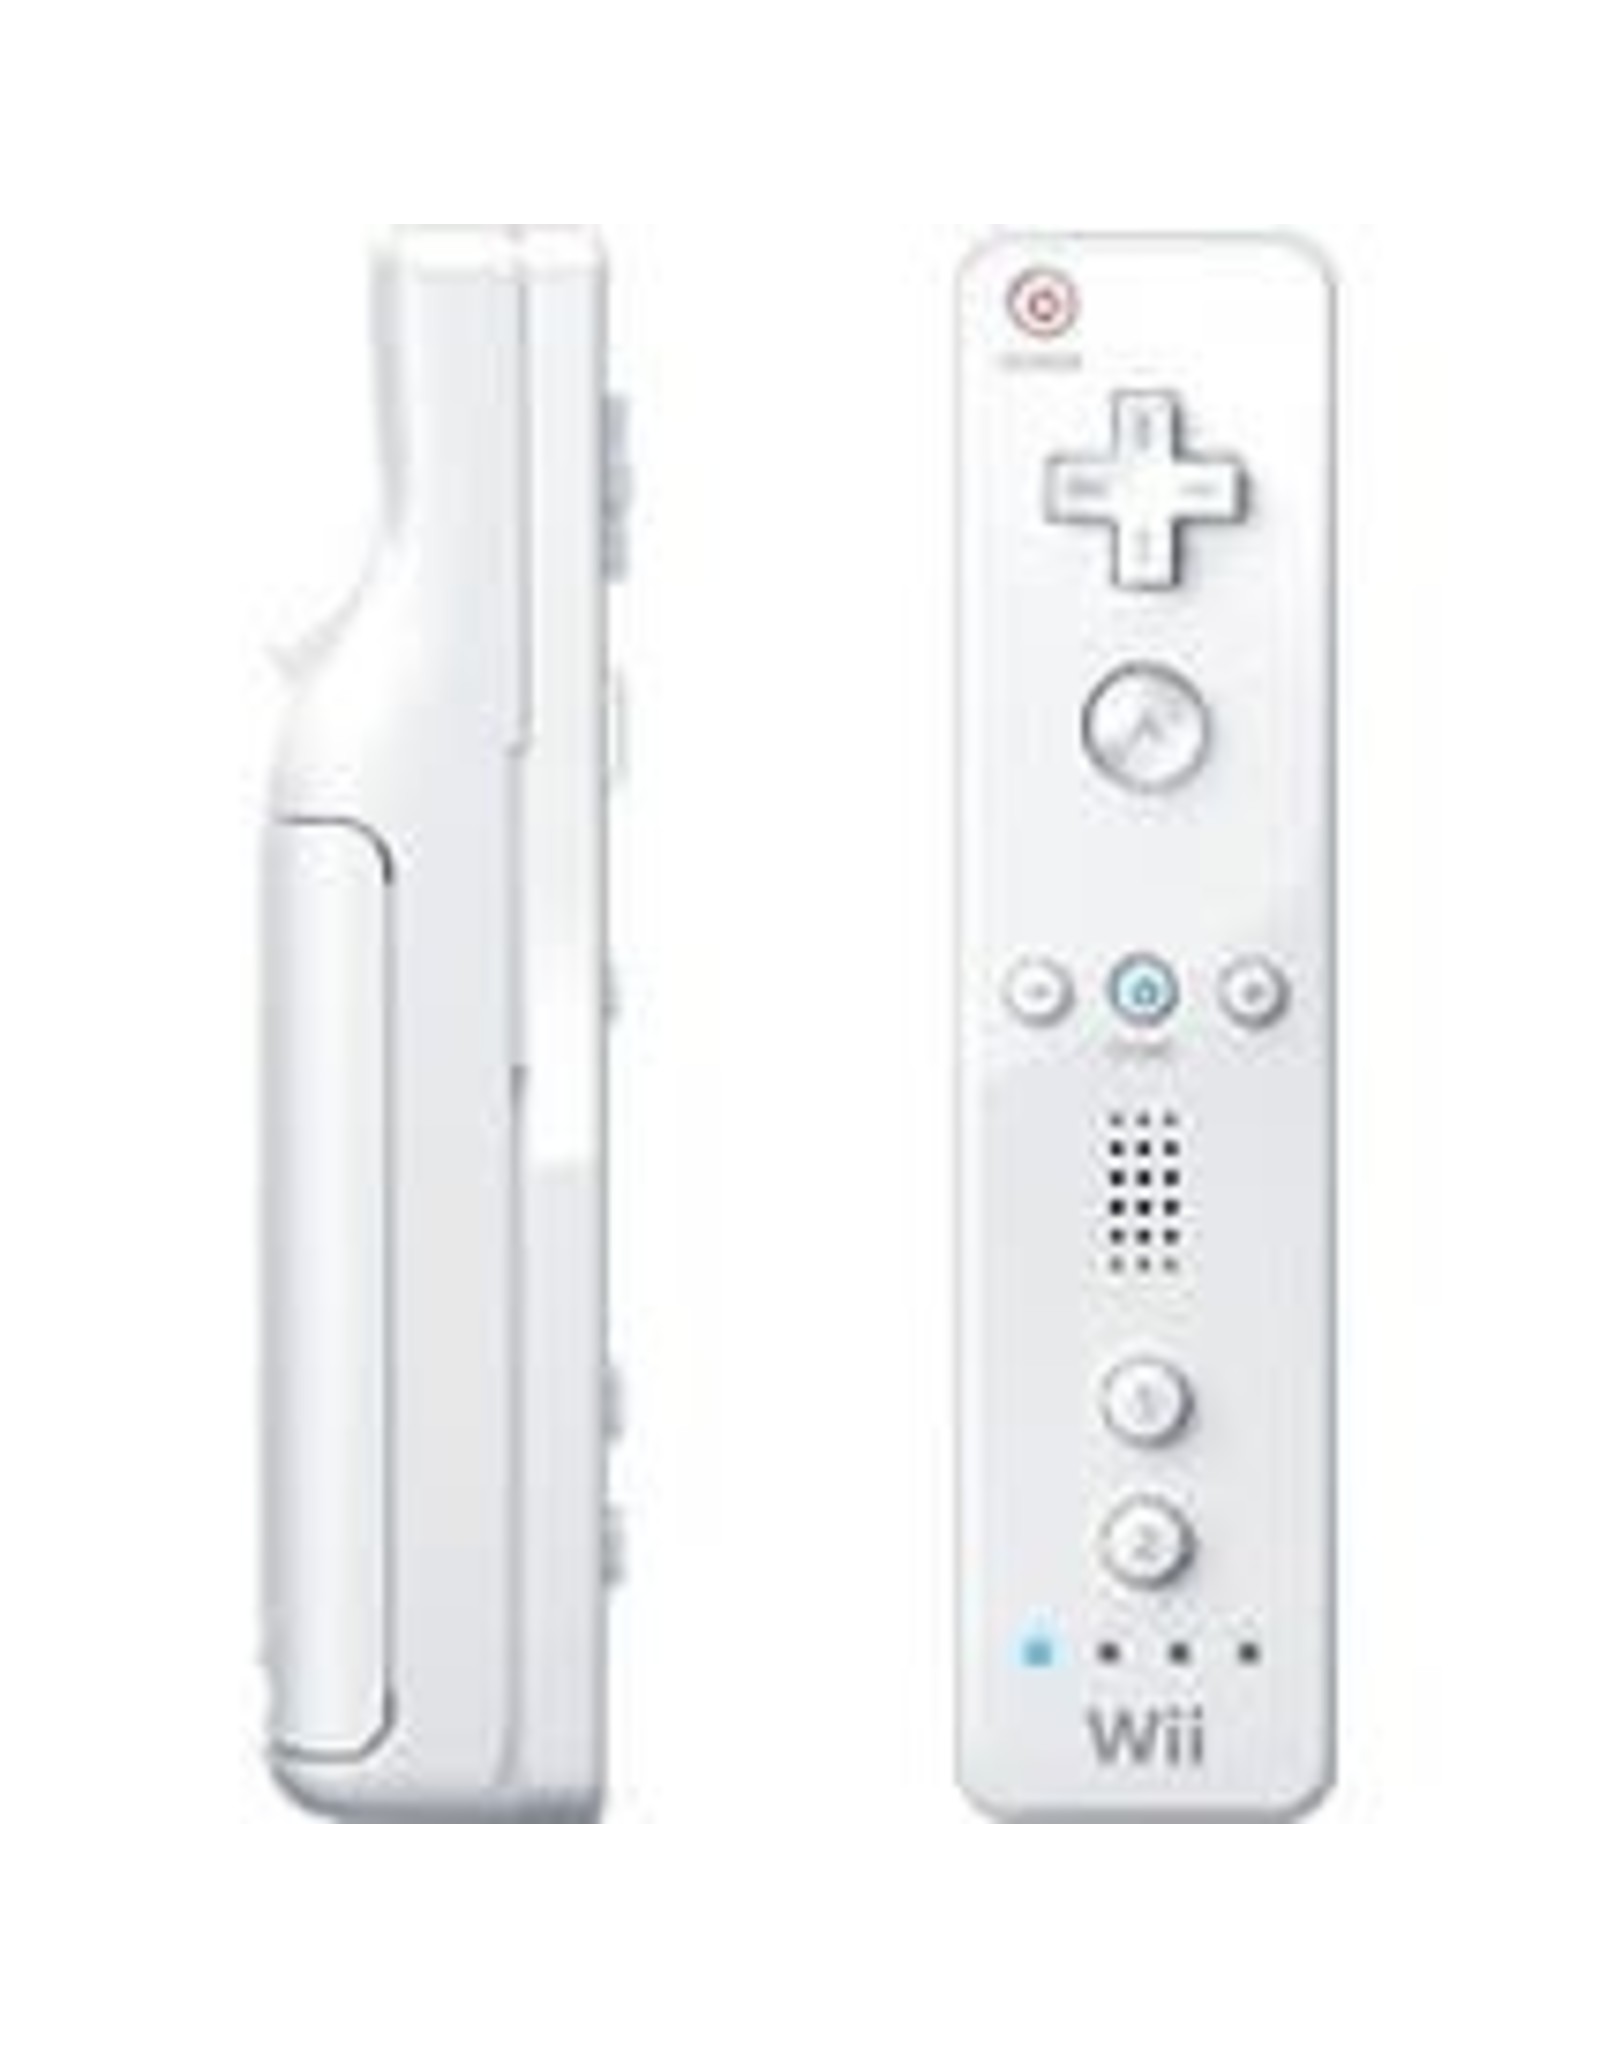 Wii Wii Remote - White (Used)